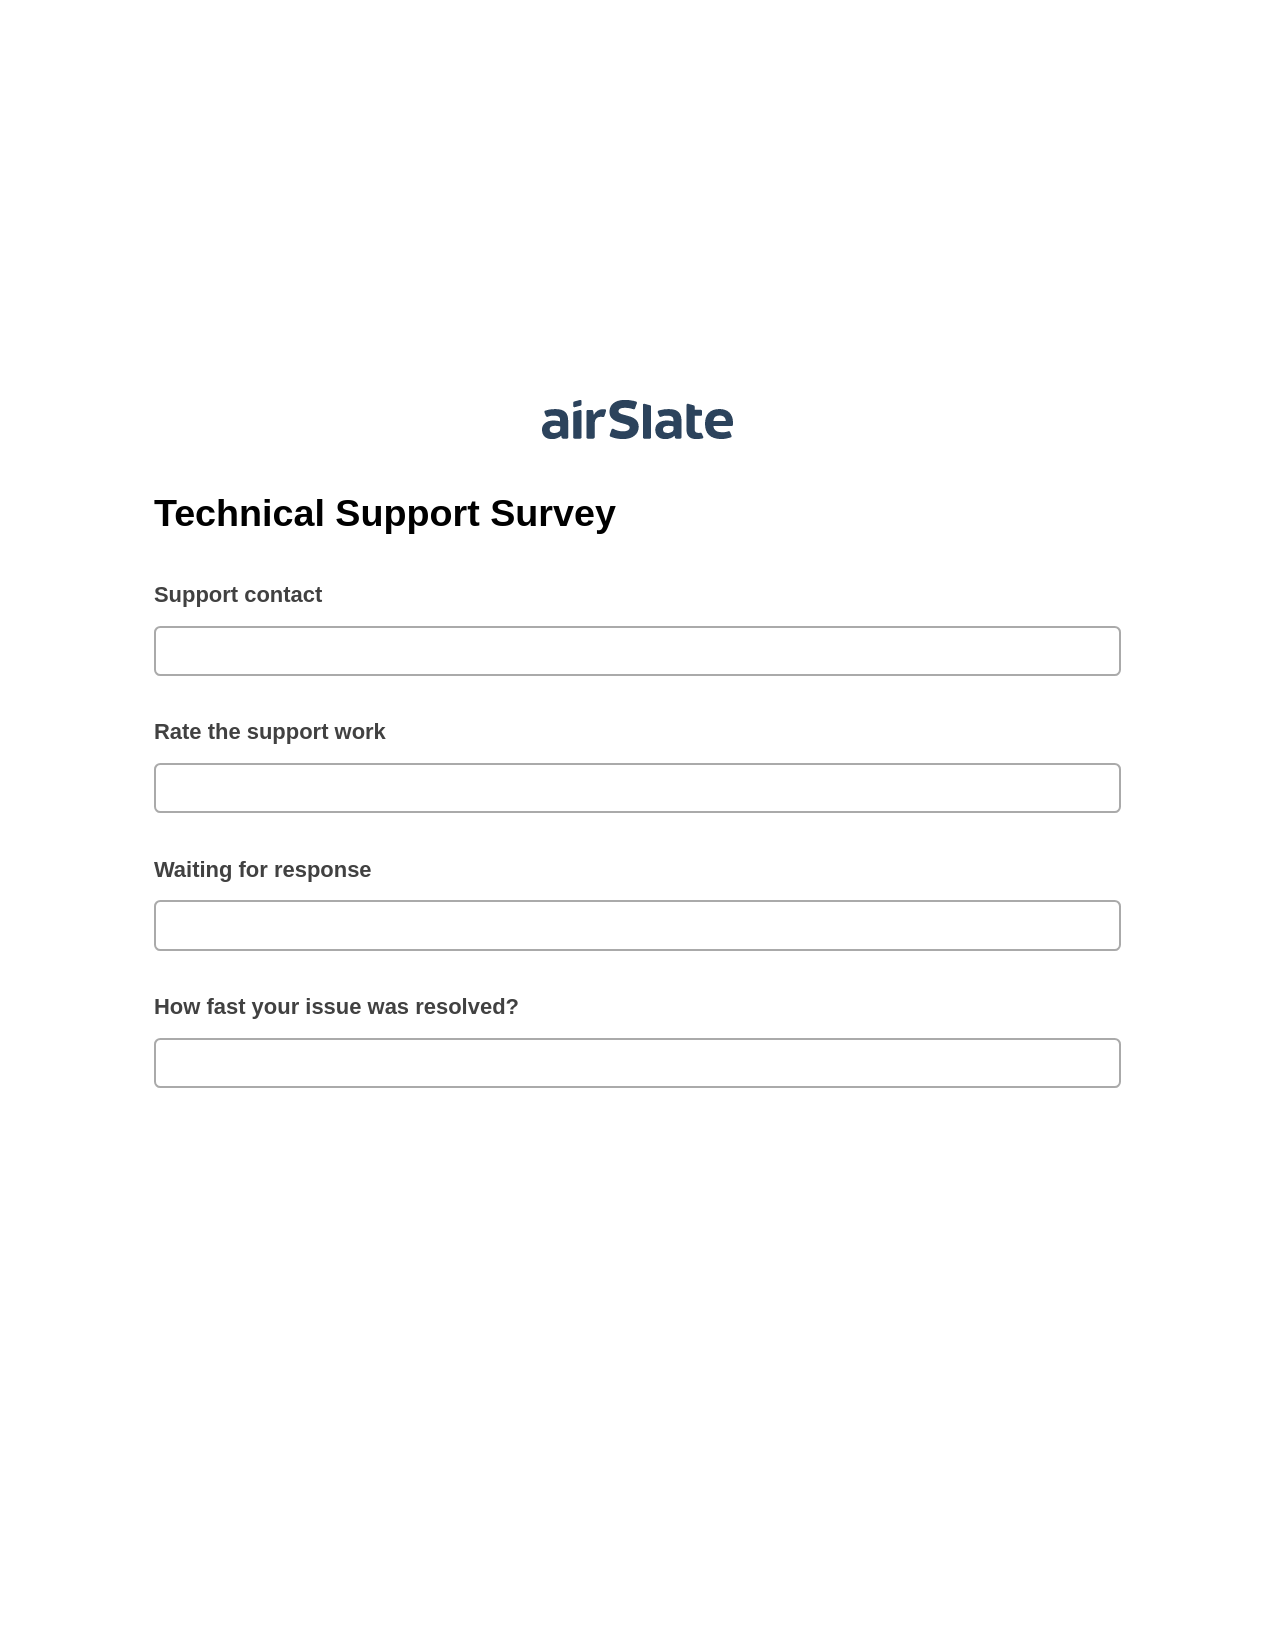 Technical Support Survey Pre-fill from Salesforce Records Bot, Send Mailchimp Campaign Bot, Archive to Dropbox Bot